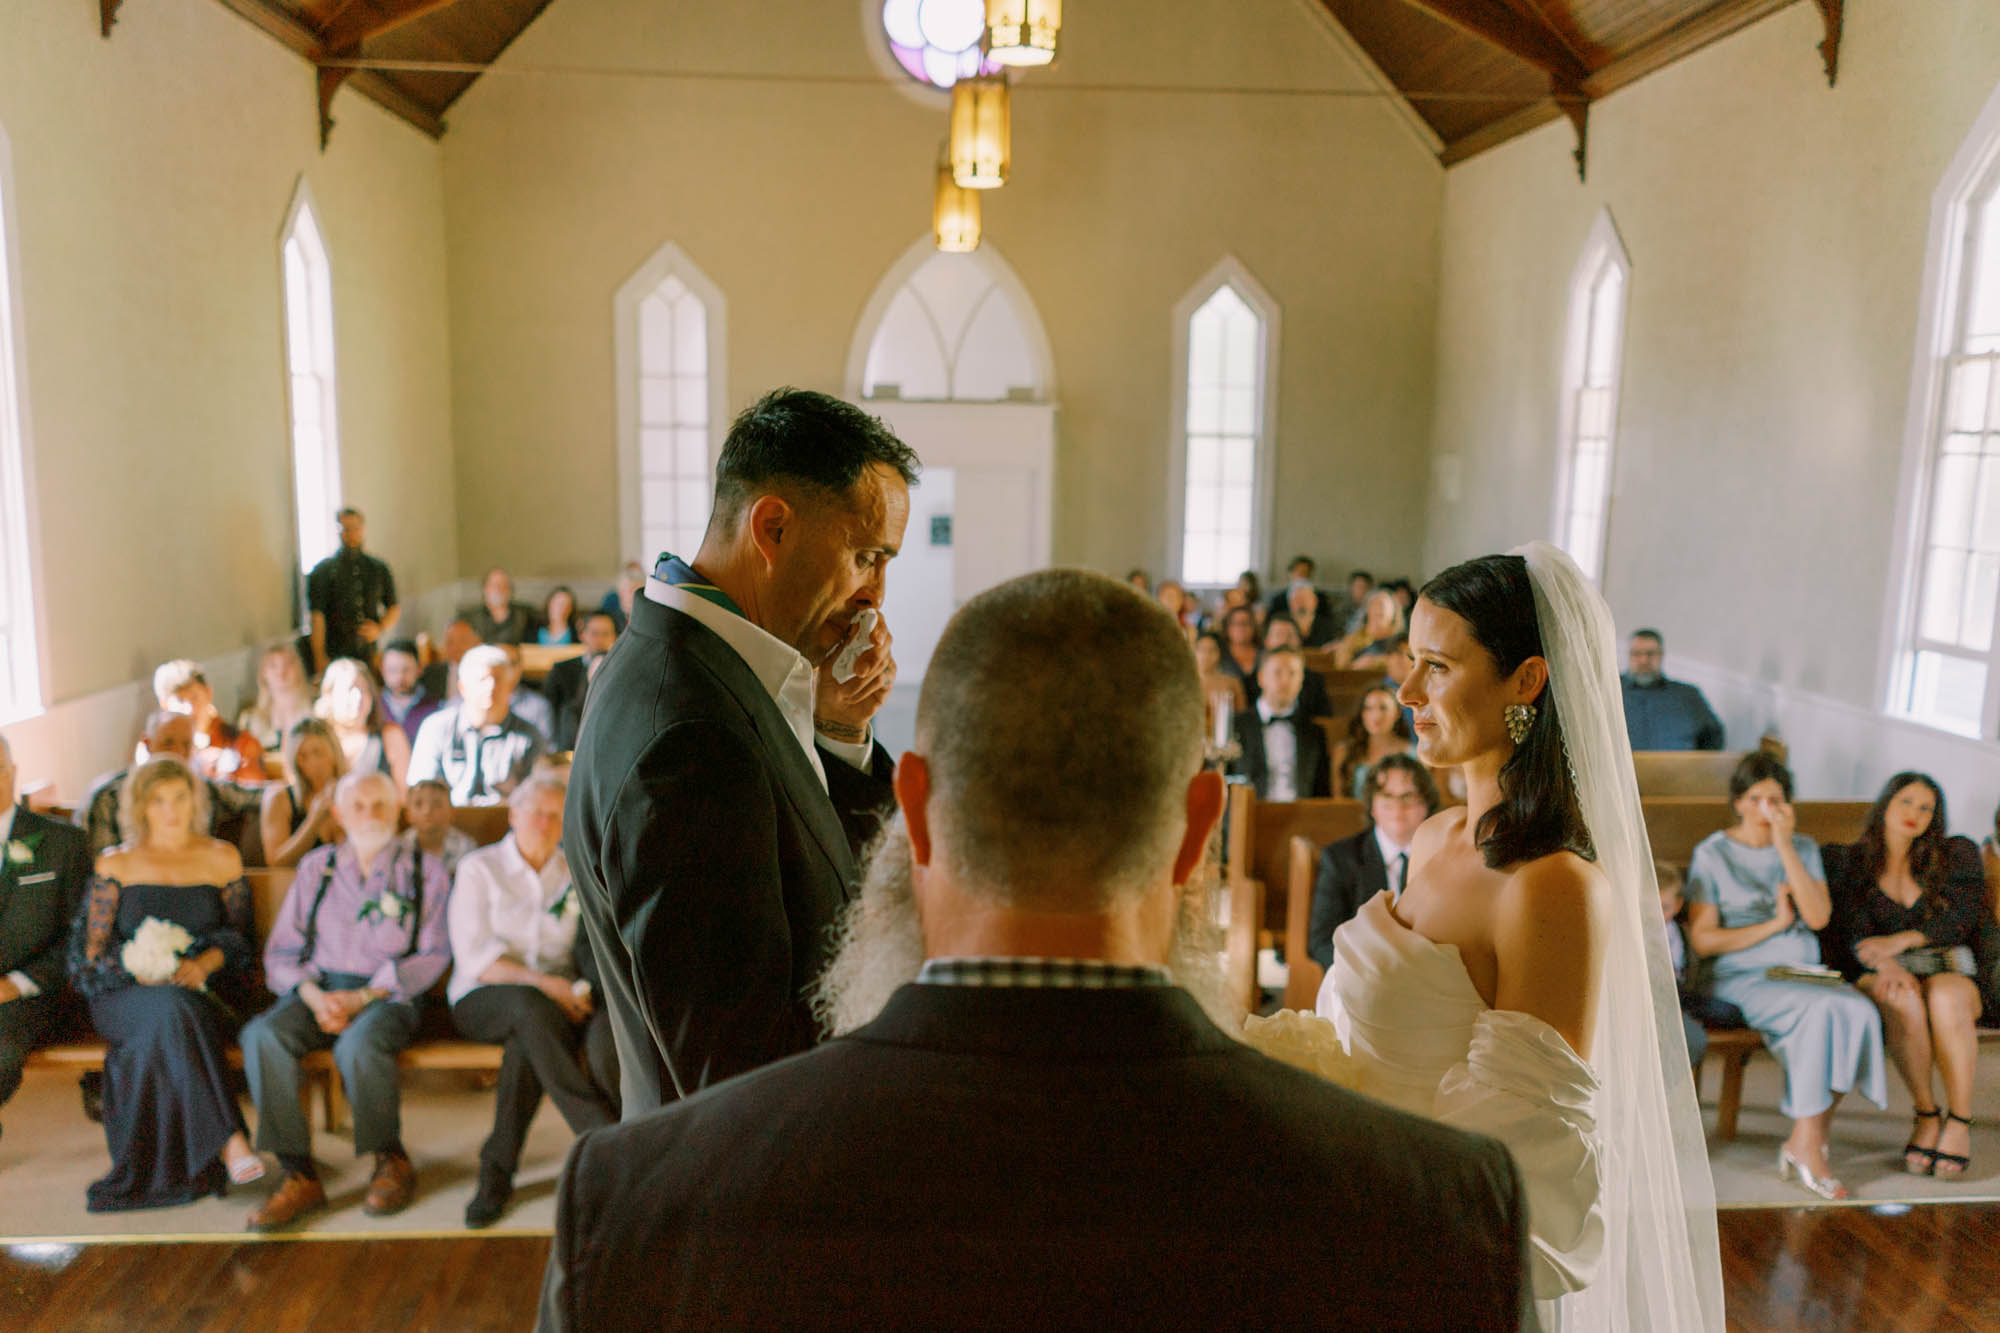 Alexa and Peter's wedding ceremony at Belle Chapel, Snohomish WA